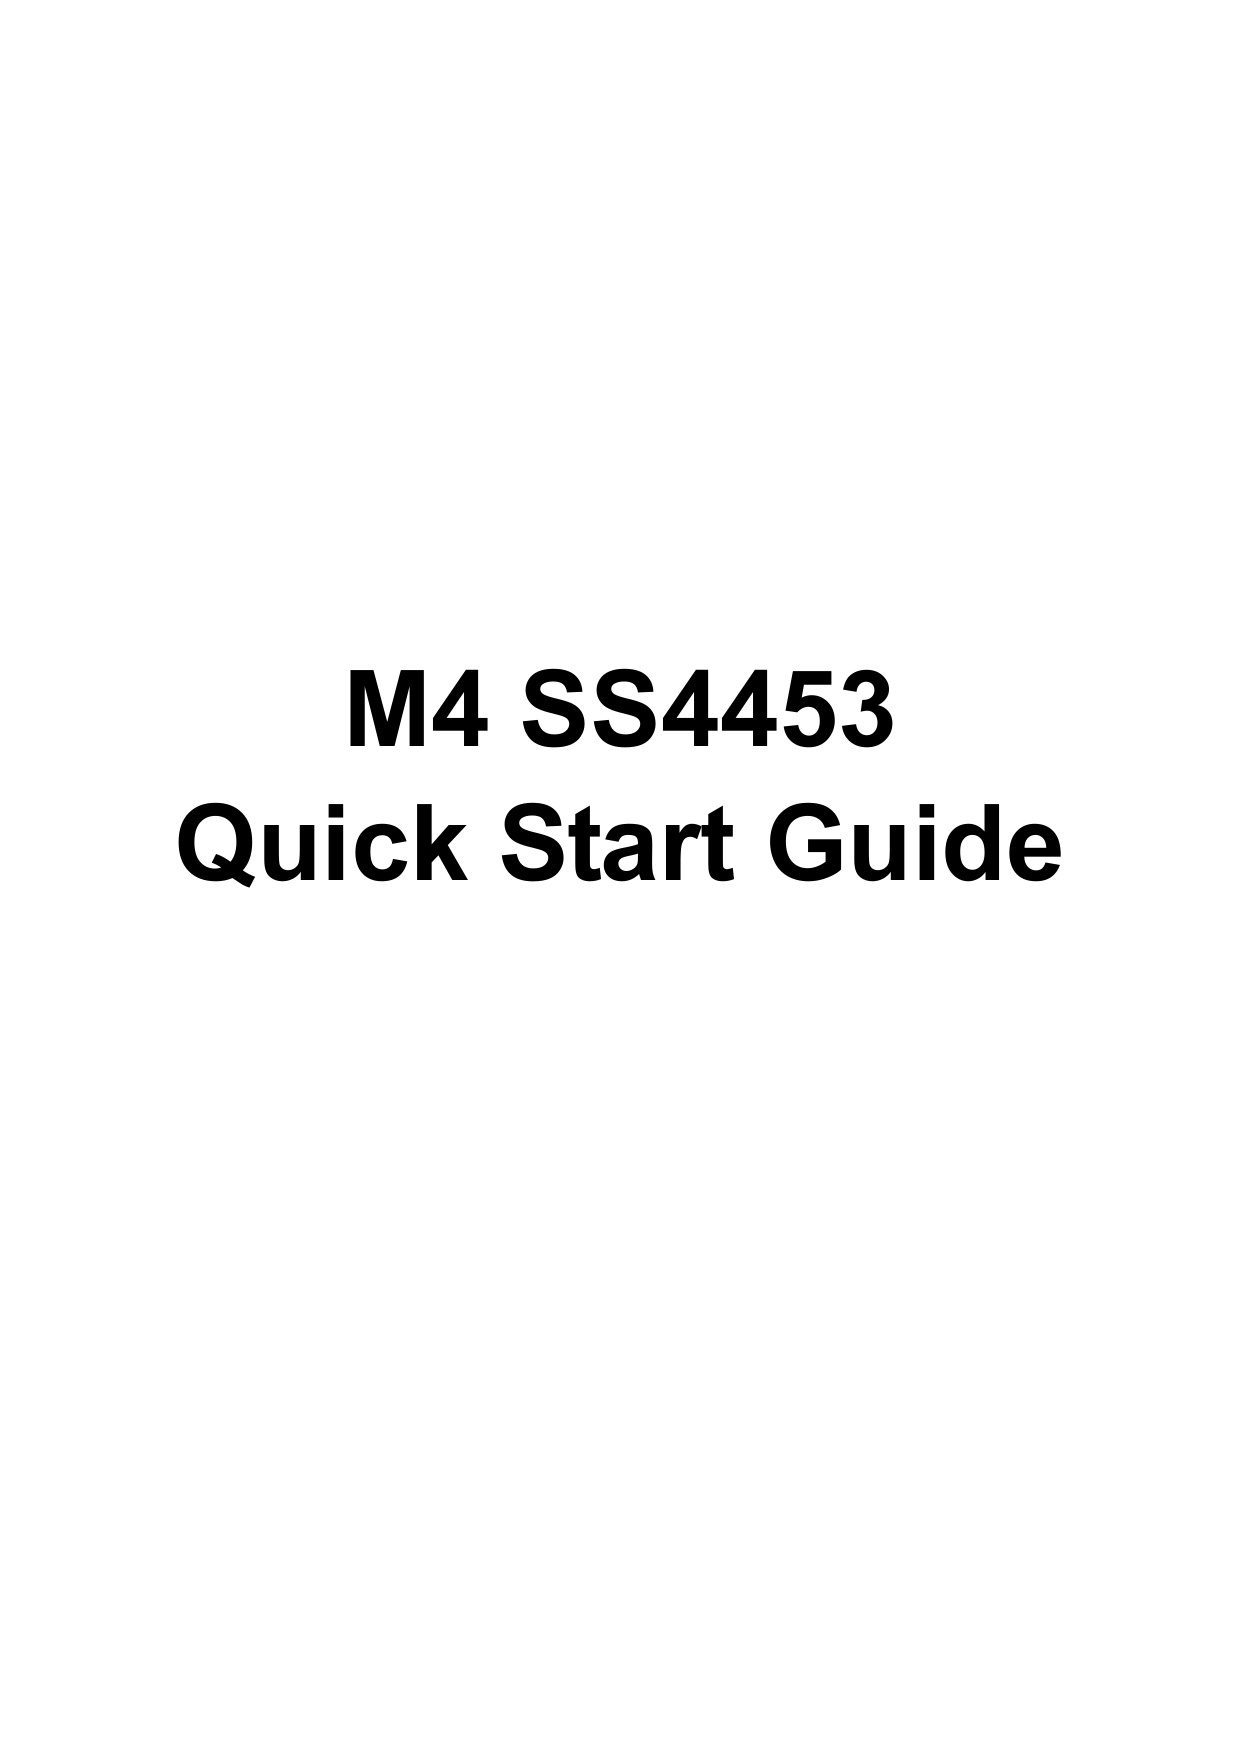       M4 SS4453 Quick Start Guide        